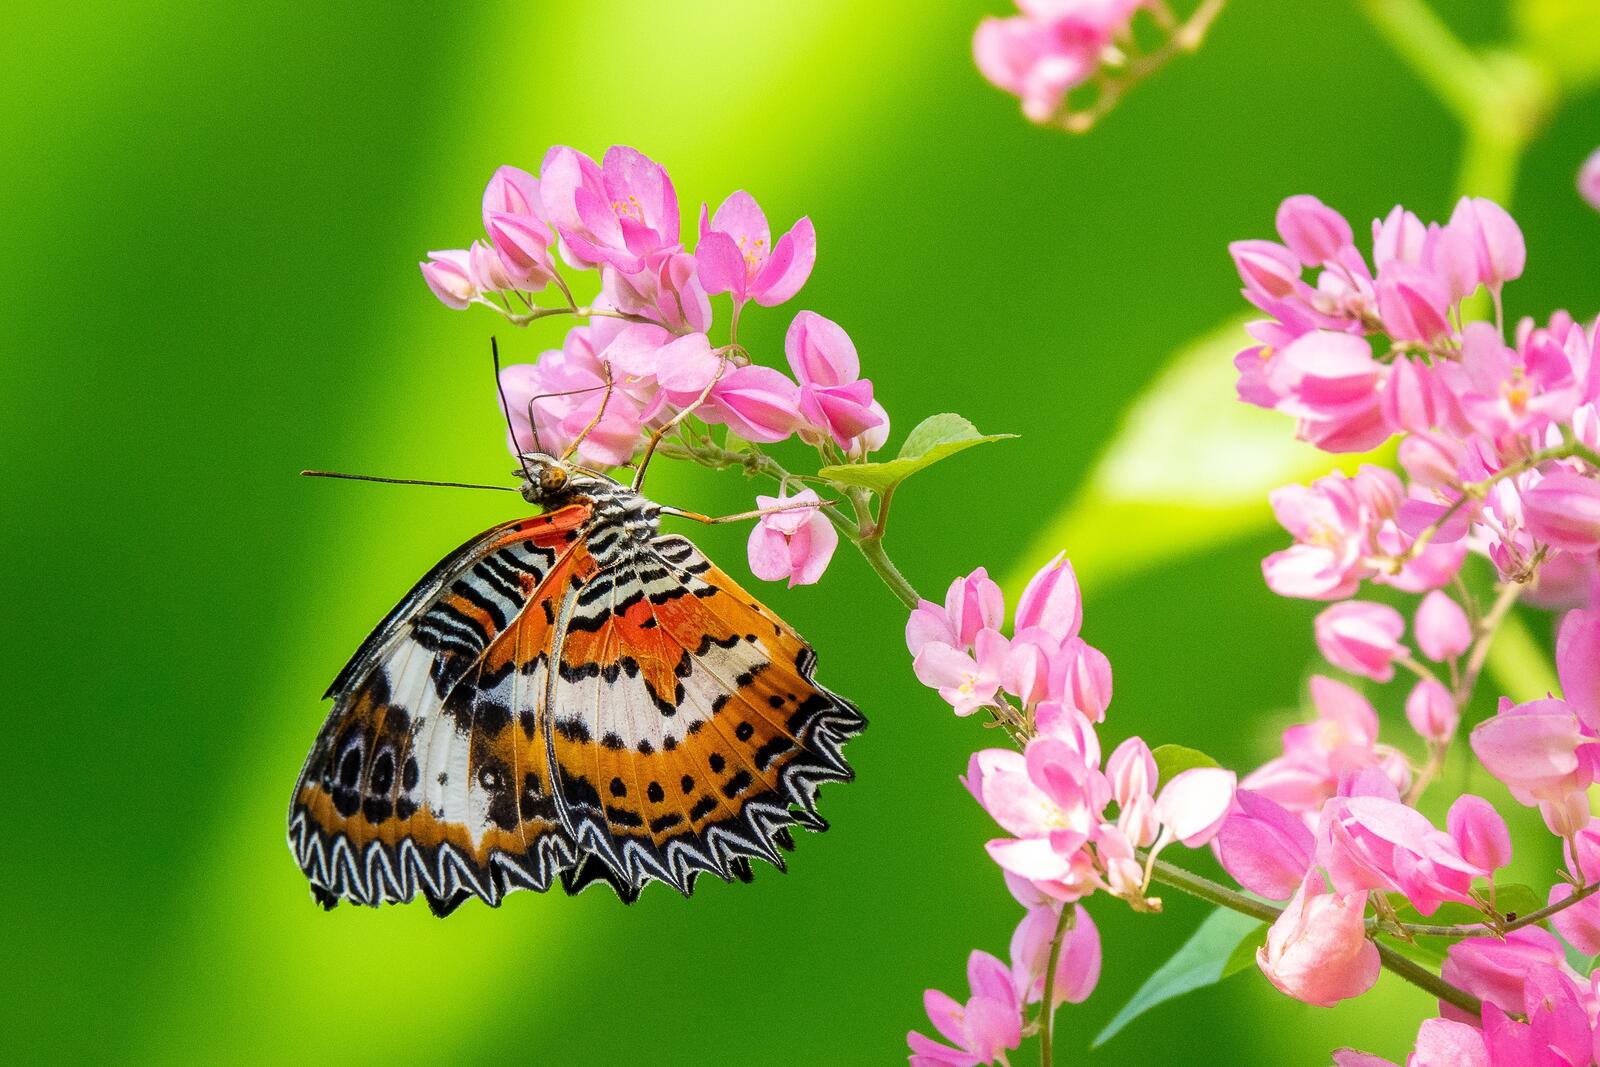 Wallpapers insects butterfly green background on the desktop